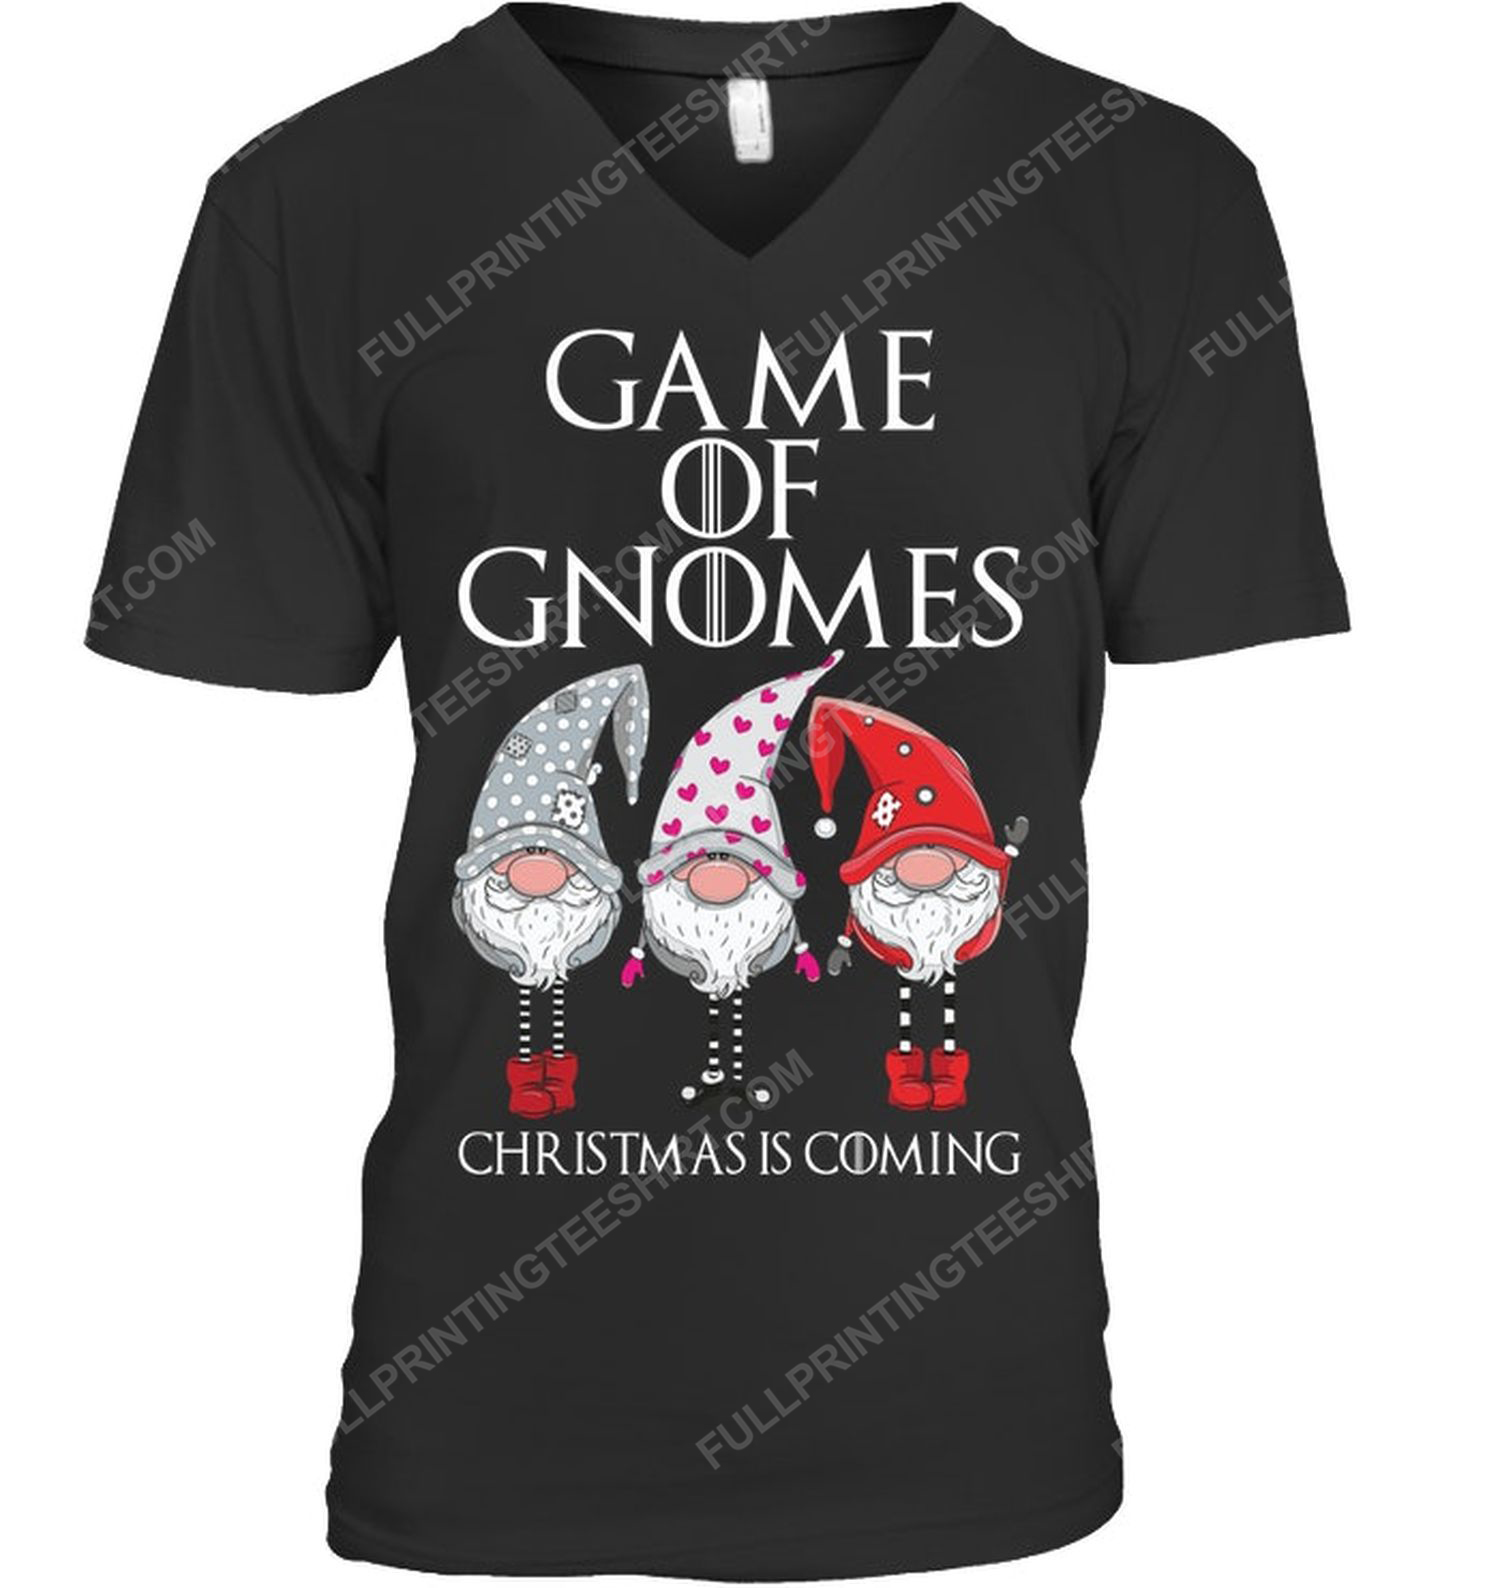 Game of gnomes christmas is coming v-neck